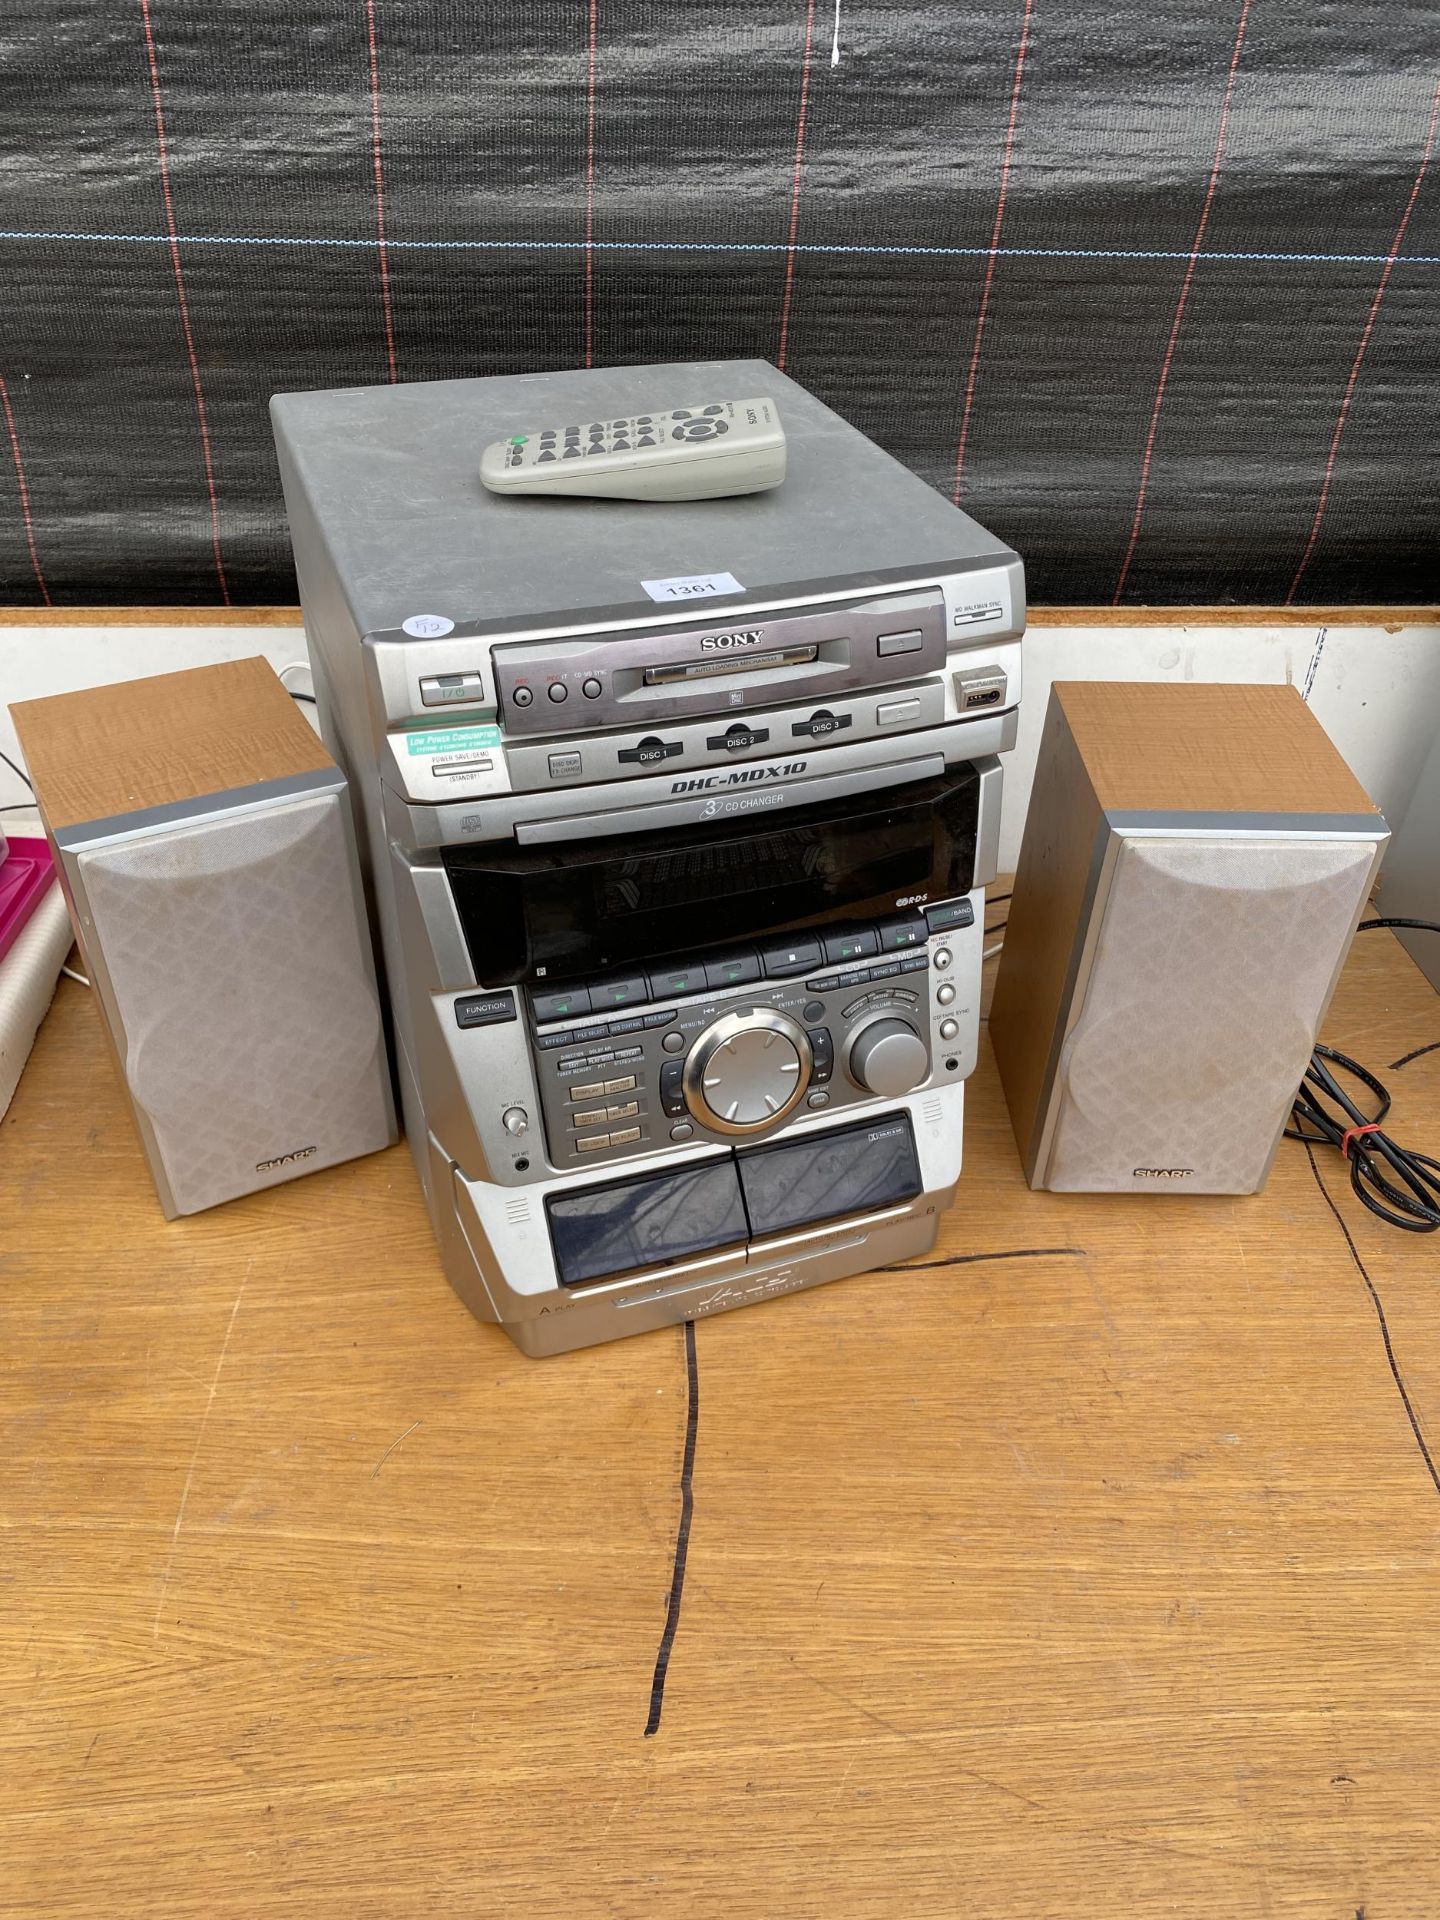 A SONY STEREO SYSTEM WITH 3 CD CHANGER, TAPE DECK AND TWO SHARP SPEAKERS